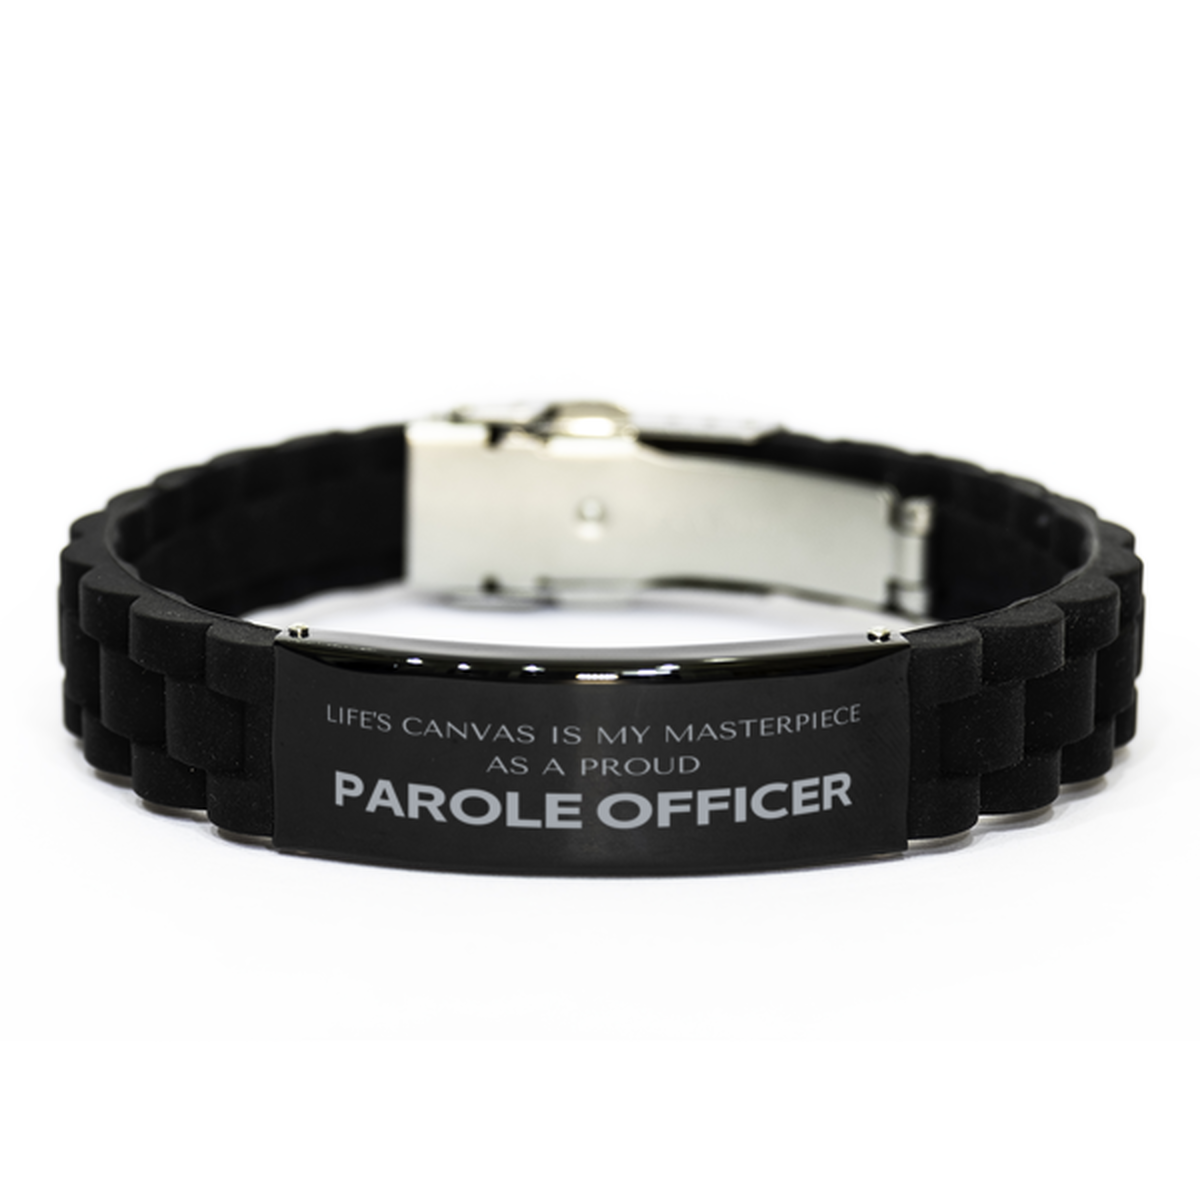 Proud Parole Officer Gifts, Life's canvas is my masterpiece, Epic Birthday Christmas Unique Black Glidelock Clasp Bracelet For Parole Officer, Coworkers, Men, Women, Friends